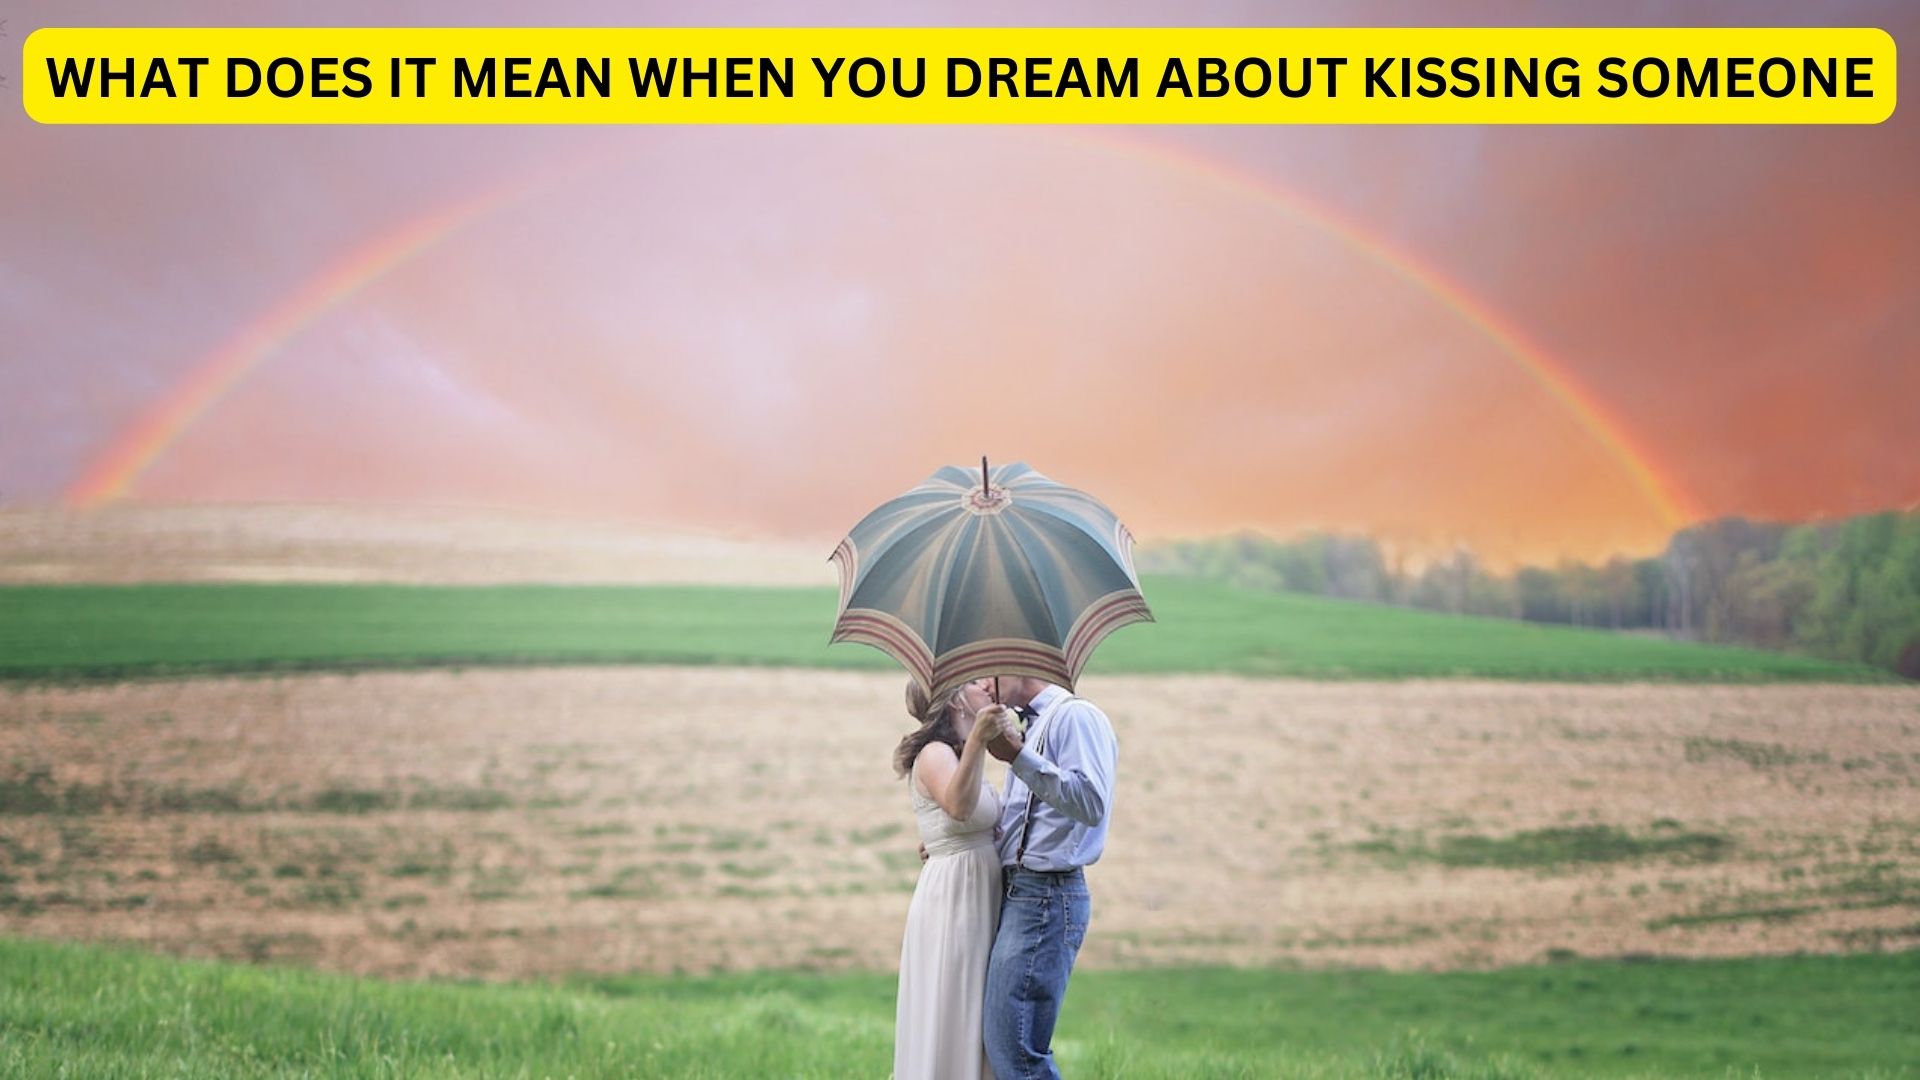 What Does It Mean When You Dream About Kissing Someone?